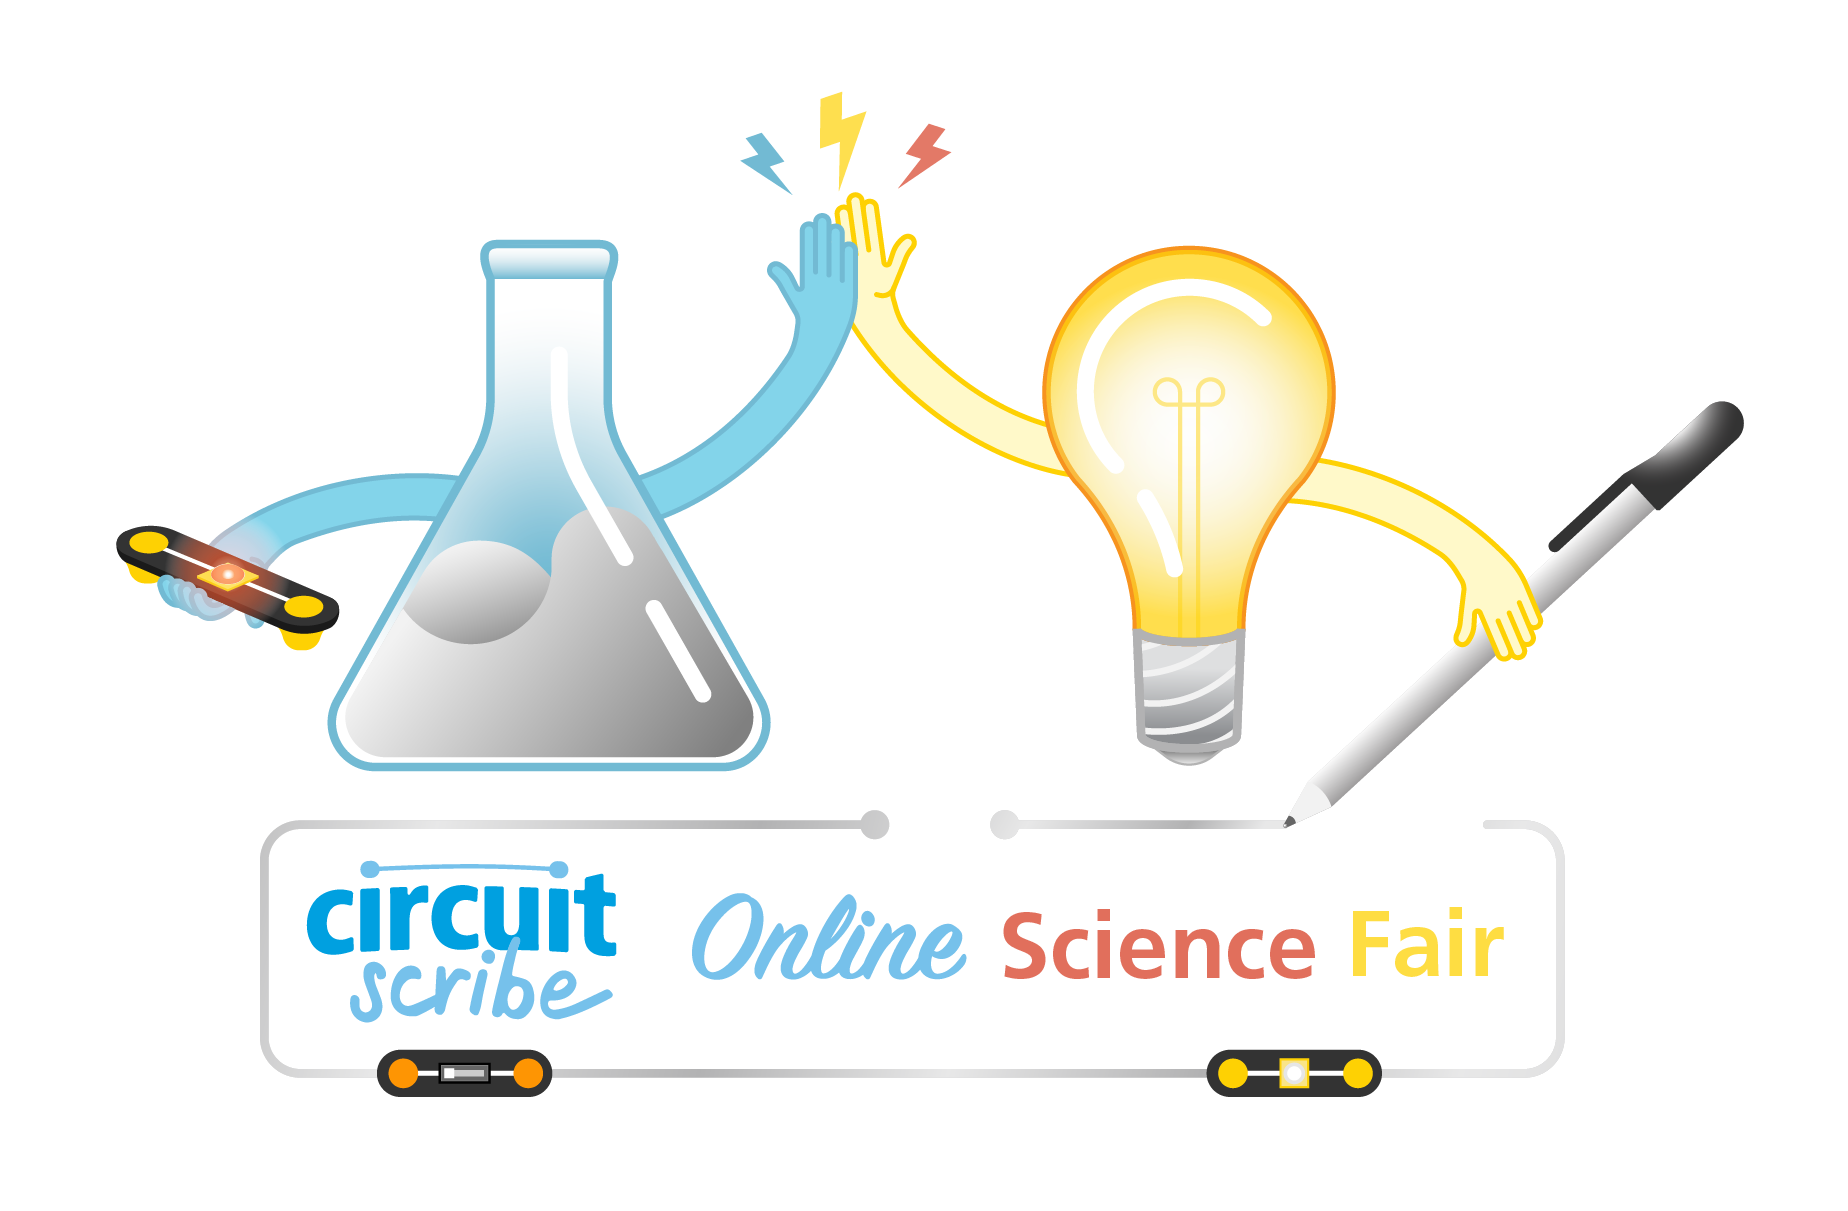 Circuit Scribe Online Science Fair Graphic